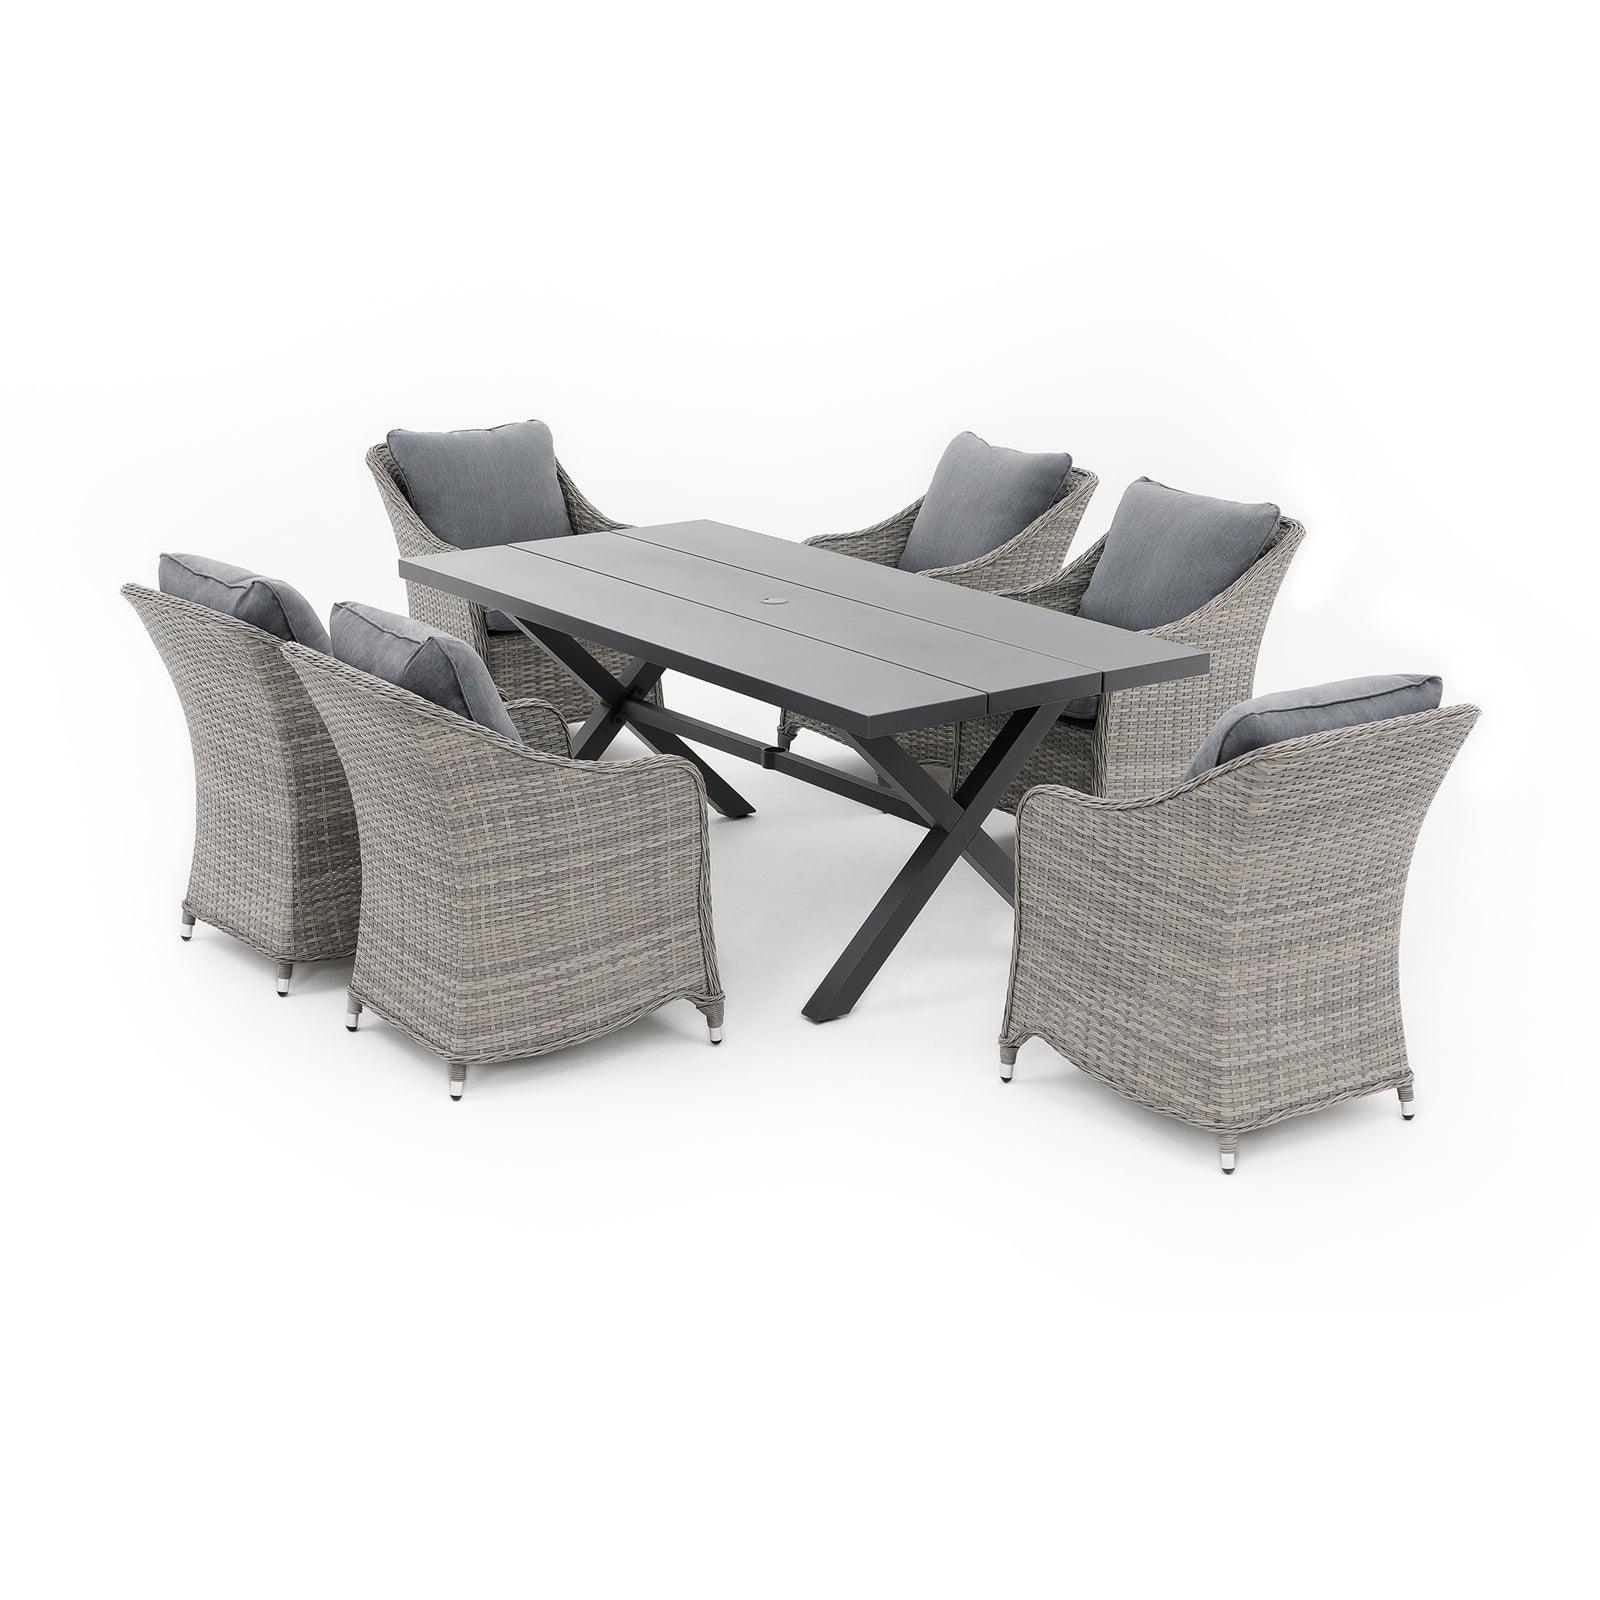 Irati grey wicker outdoor dining set with aluminum frame, grey cushions, 6 dining chairs , 1 X-shaped dining table - Jardina Furniture - 1#color_Grey#Pieces_7-pc.